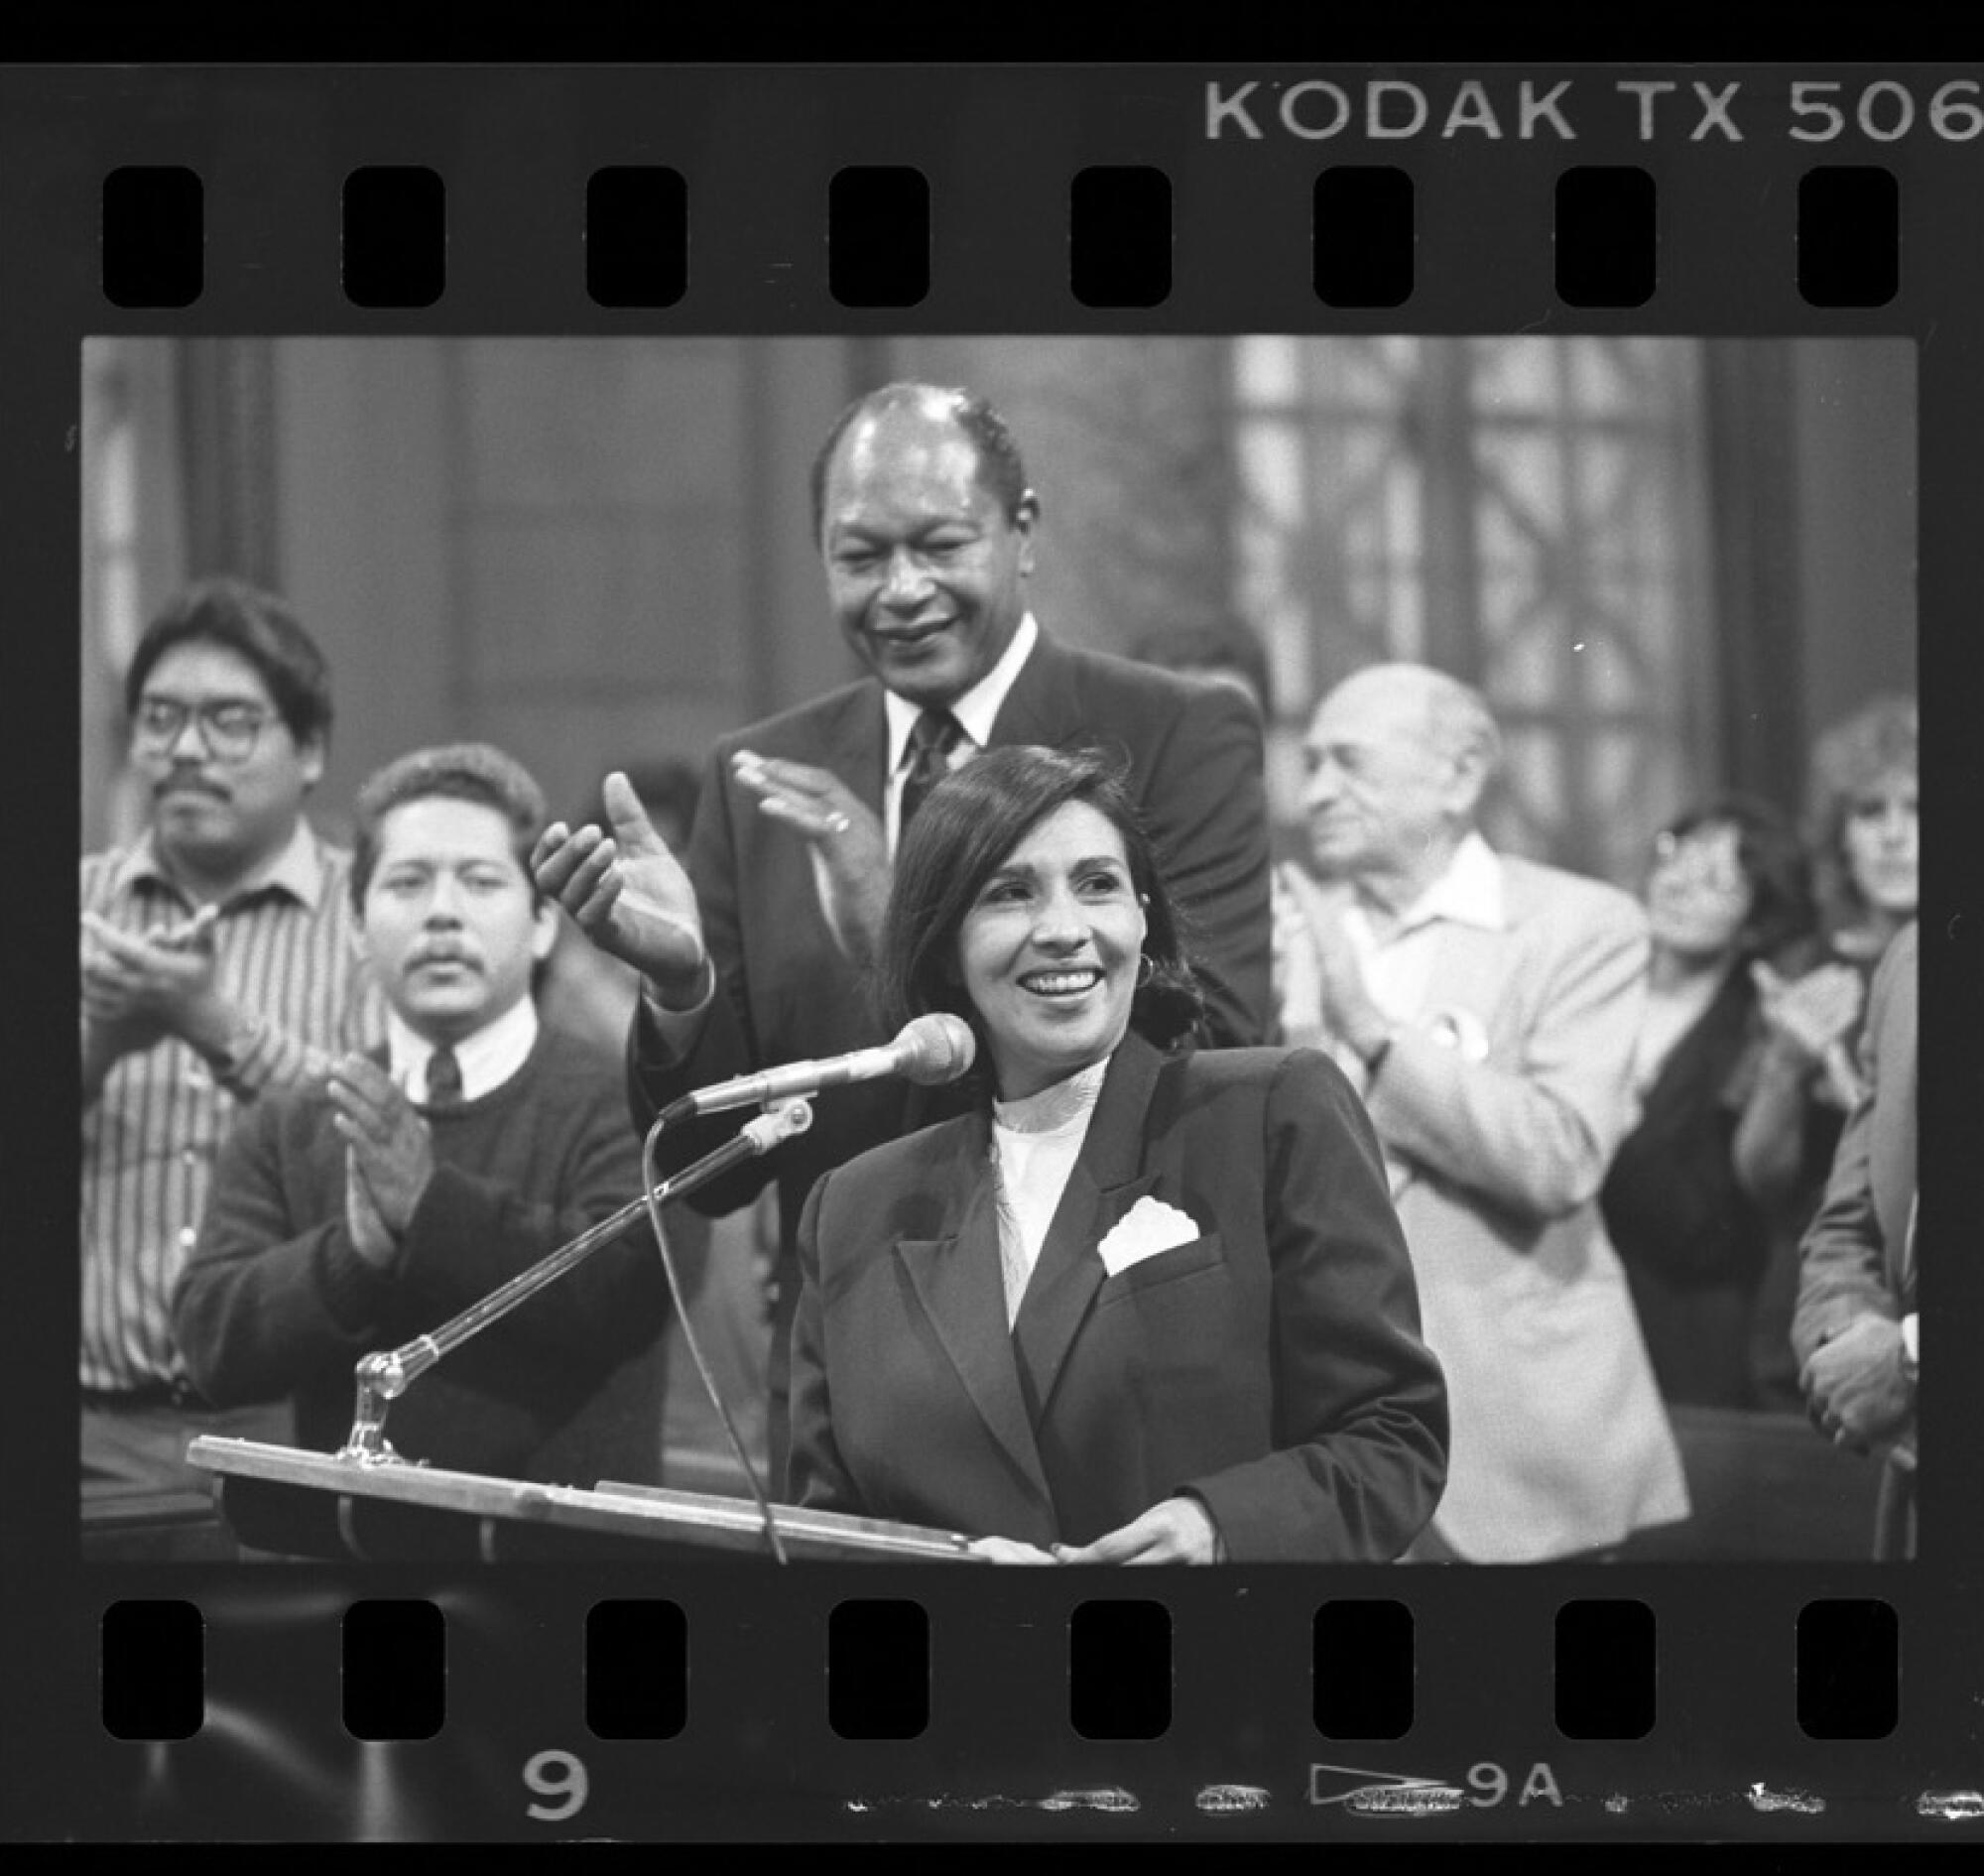 In a black and white photo frame, a woman stands at a lectern, with people behind her clapping.